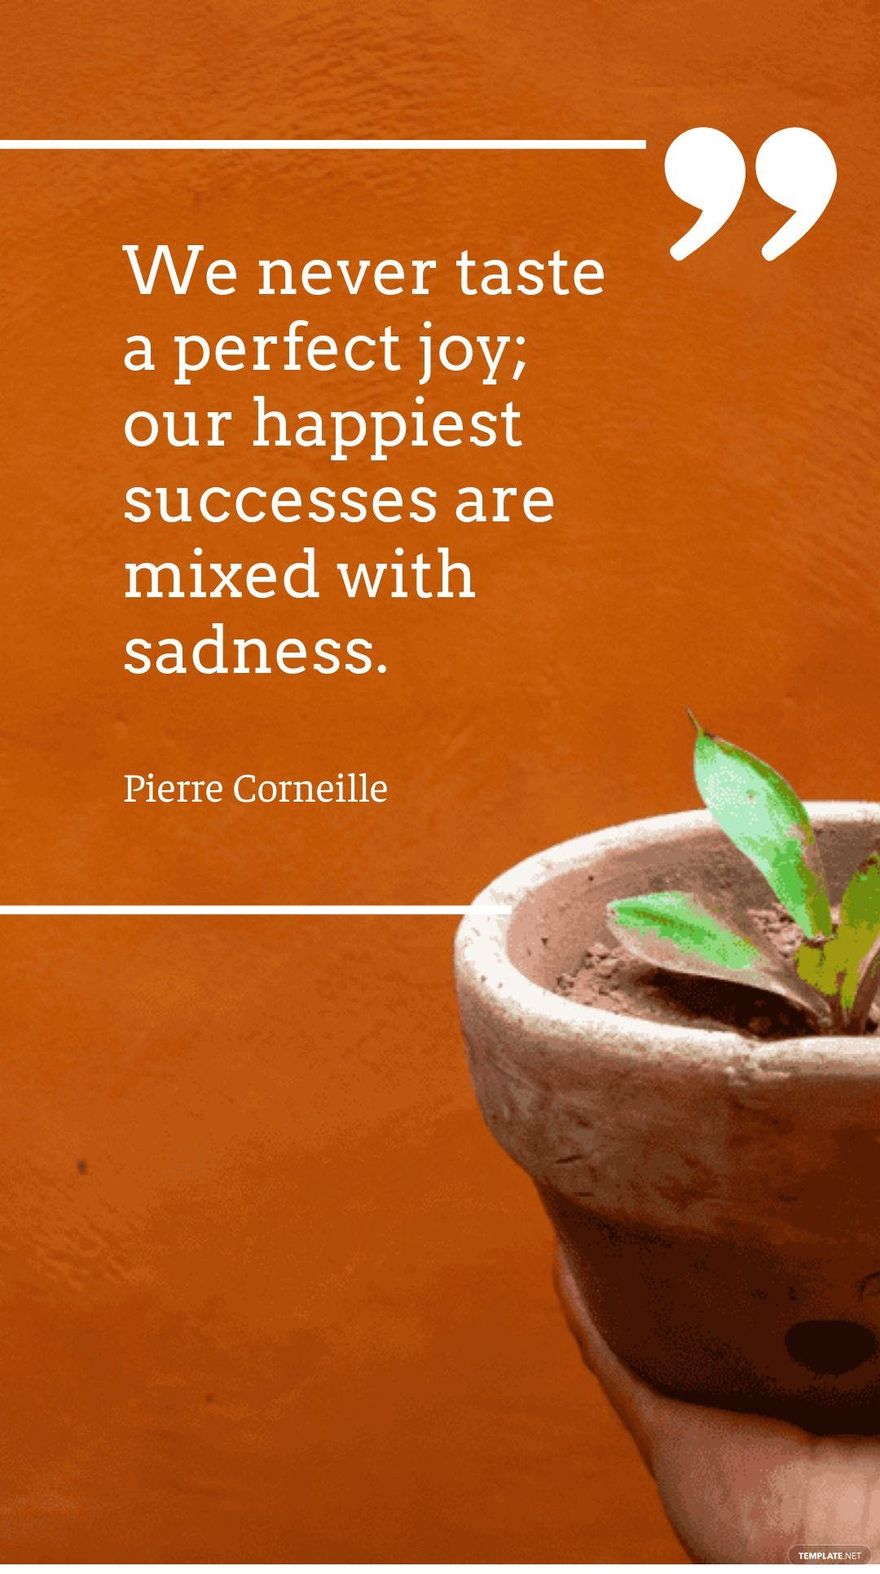 Pierre Corneille - We never taste a perfect joy; our happiest successes are mixed with sadness.